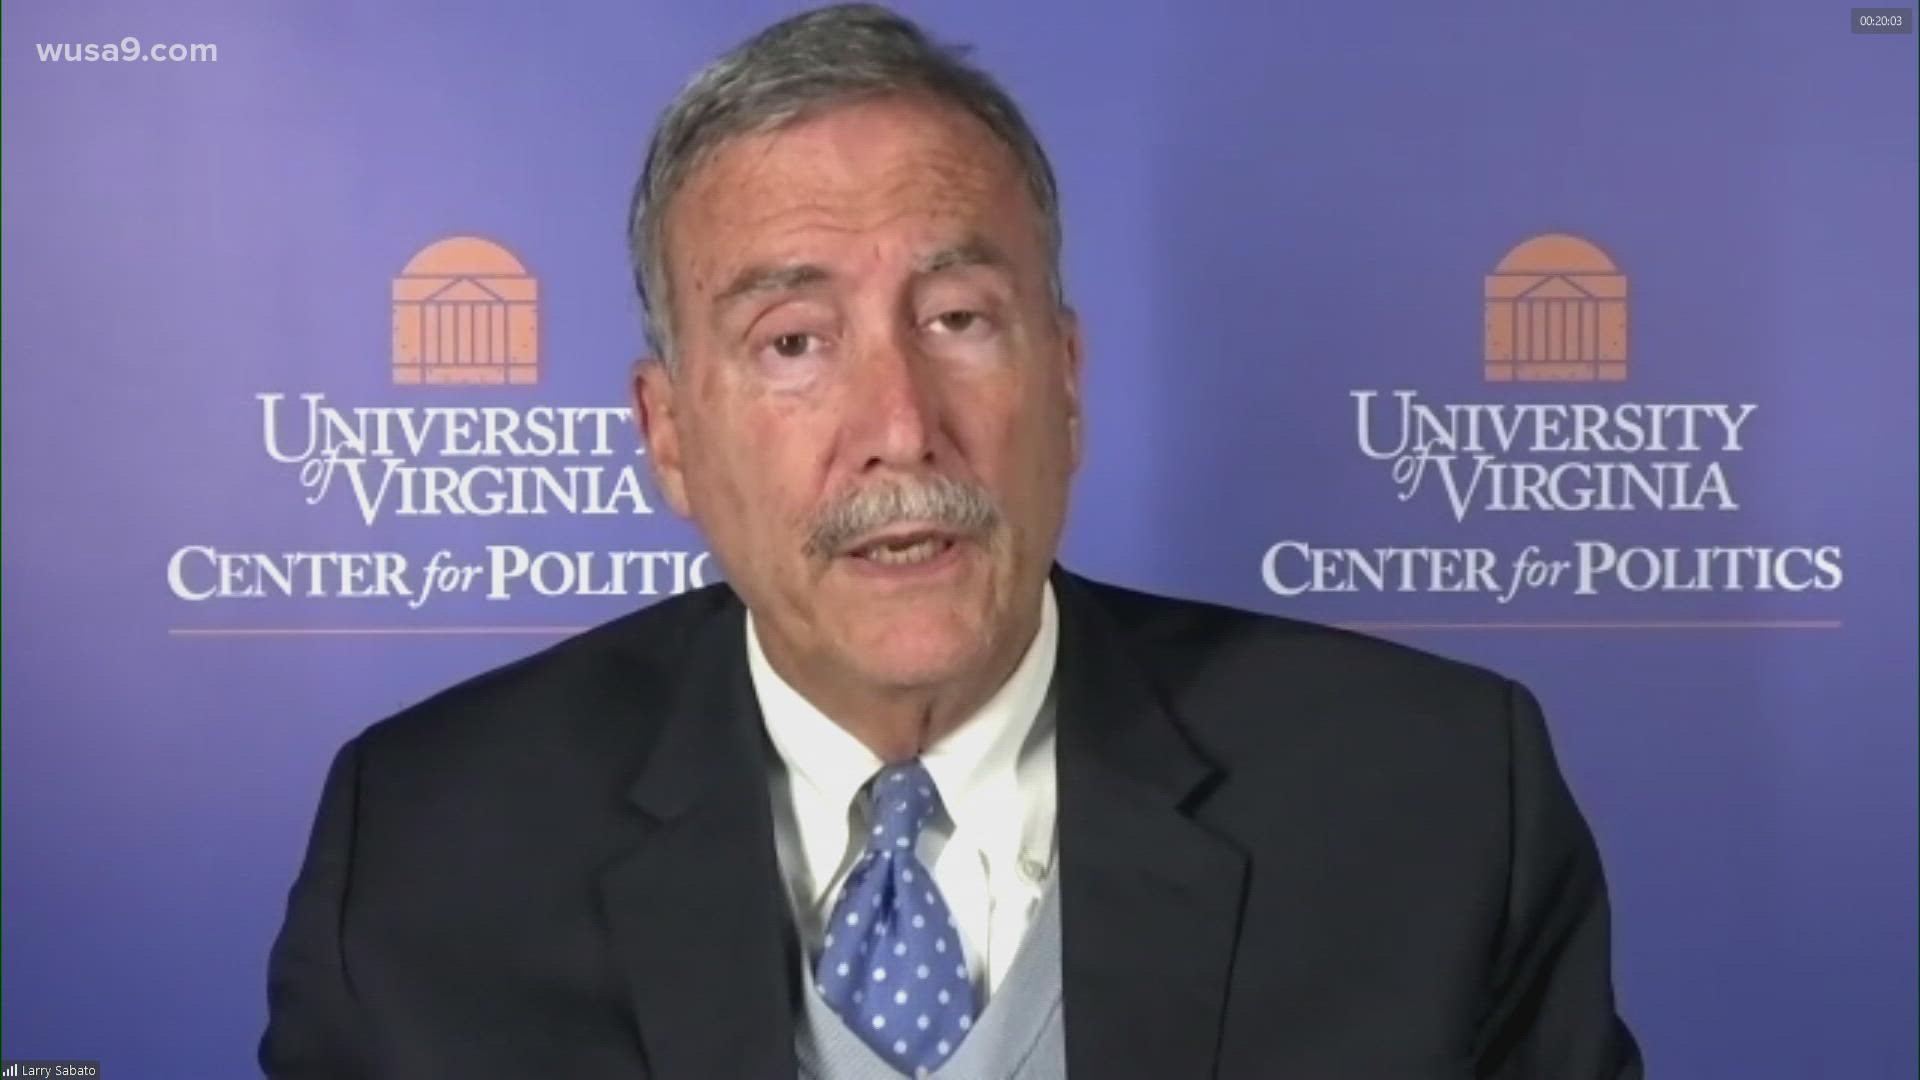 The professor of politics at the University of Virginia talks critical race theory and how he thinks Glenn Youngkin would govern the commonwealth.